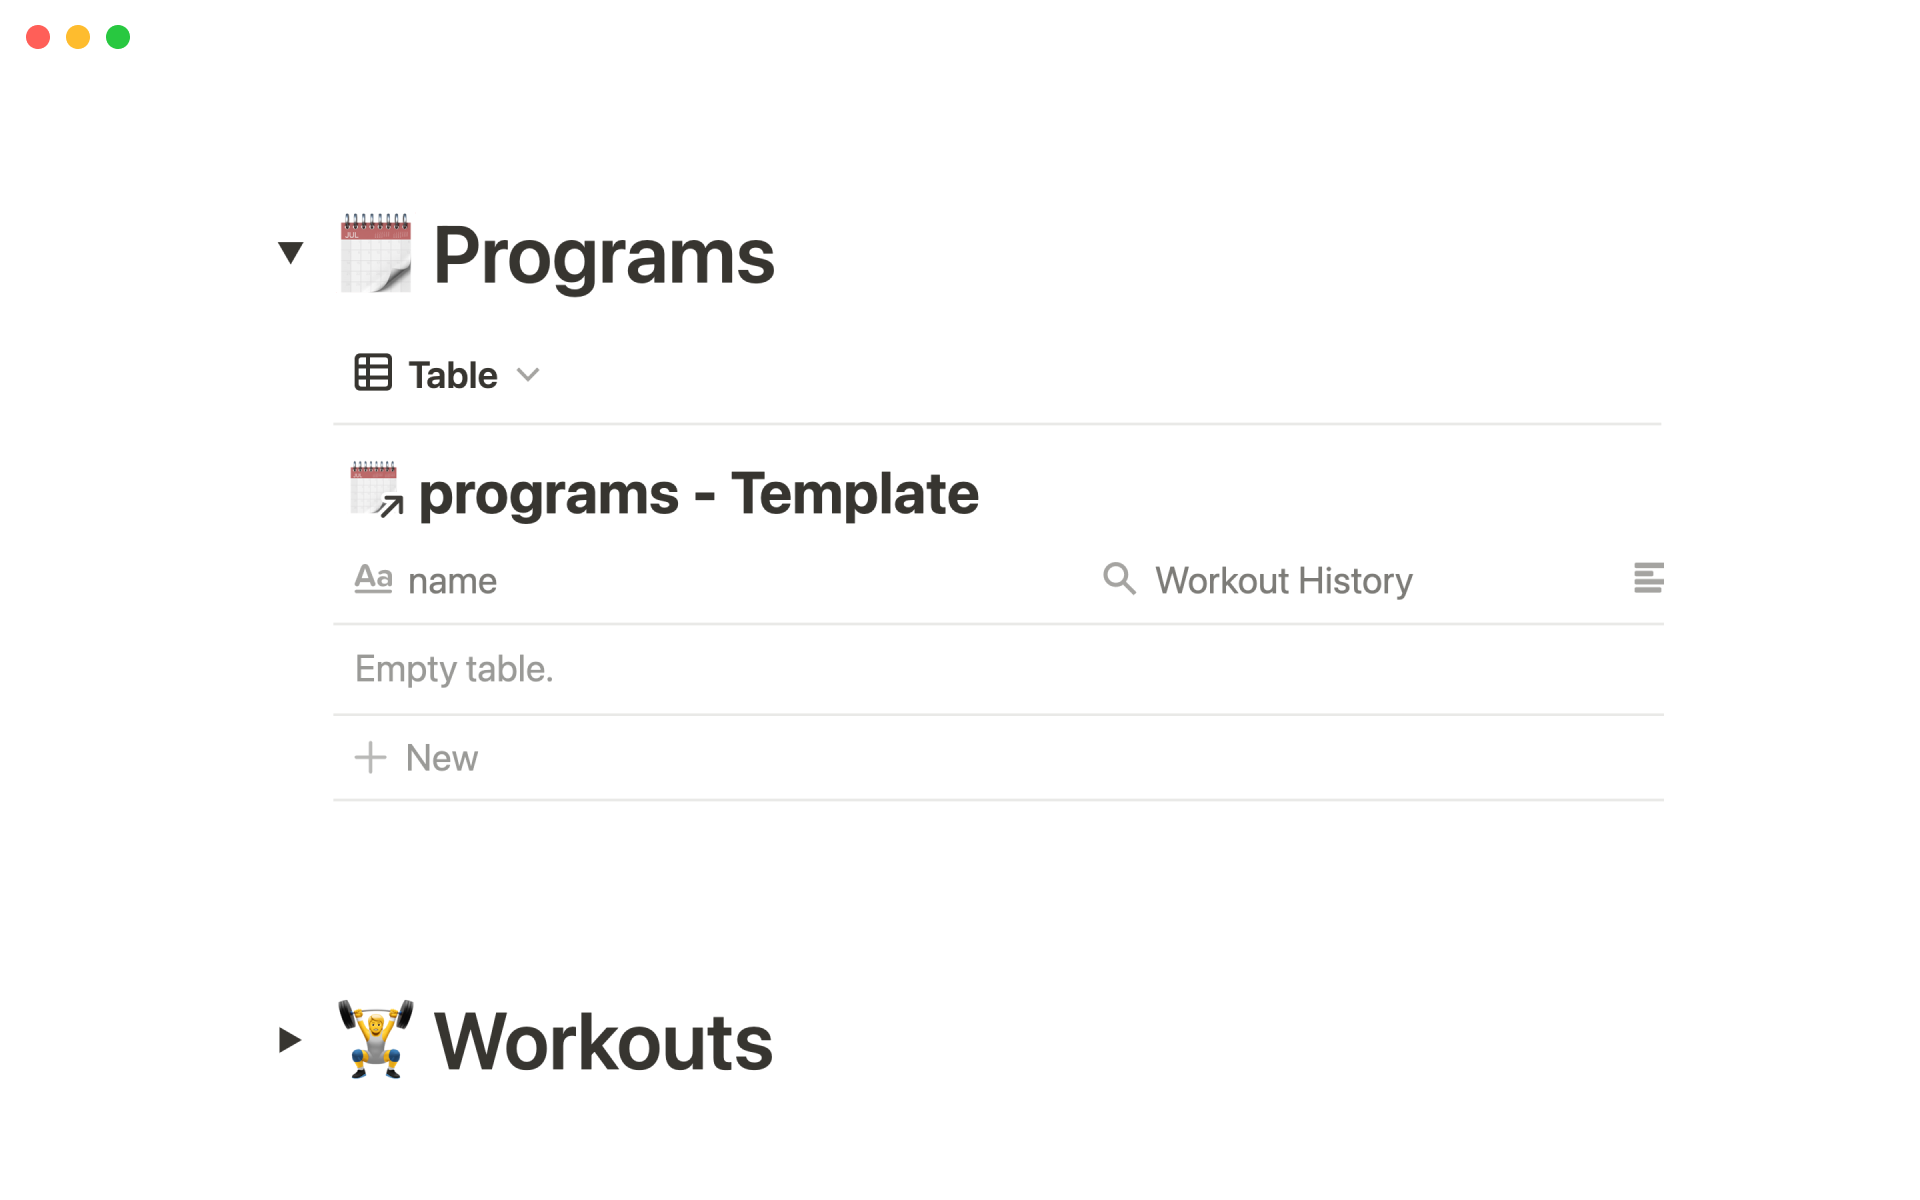 Easily create workouts, check exercise form, and track progress.